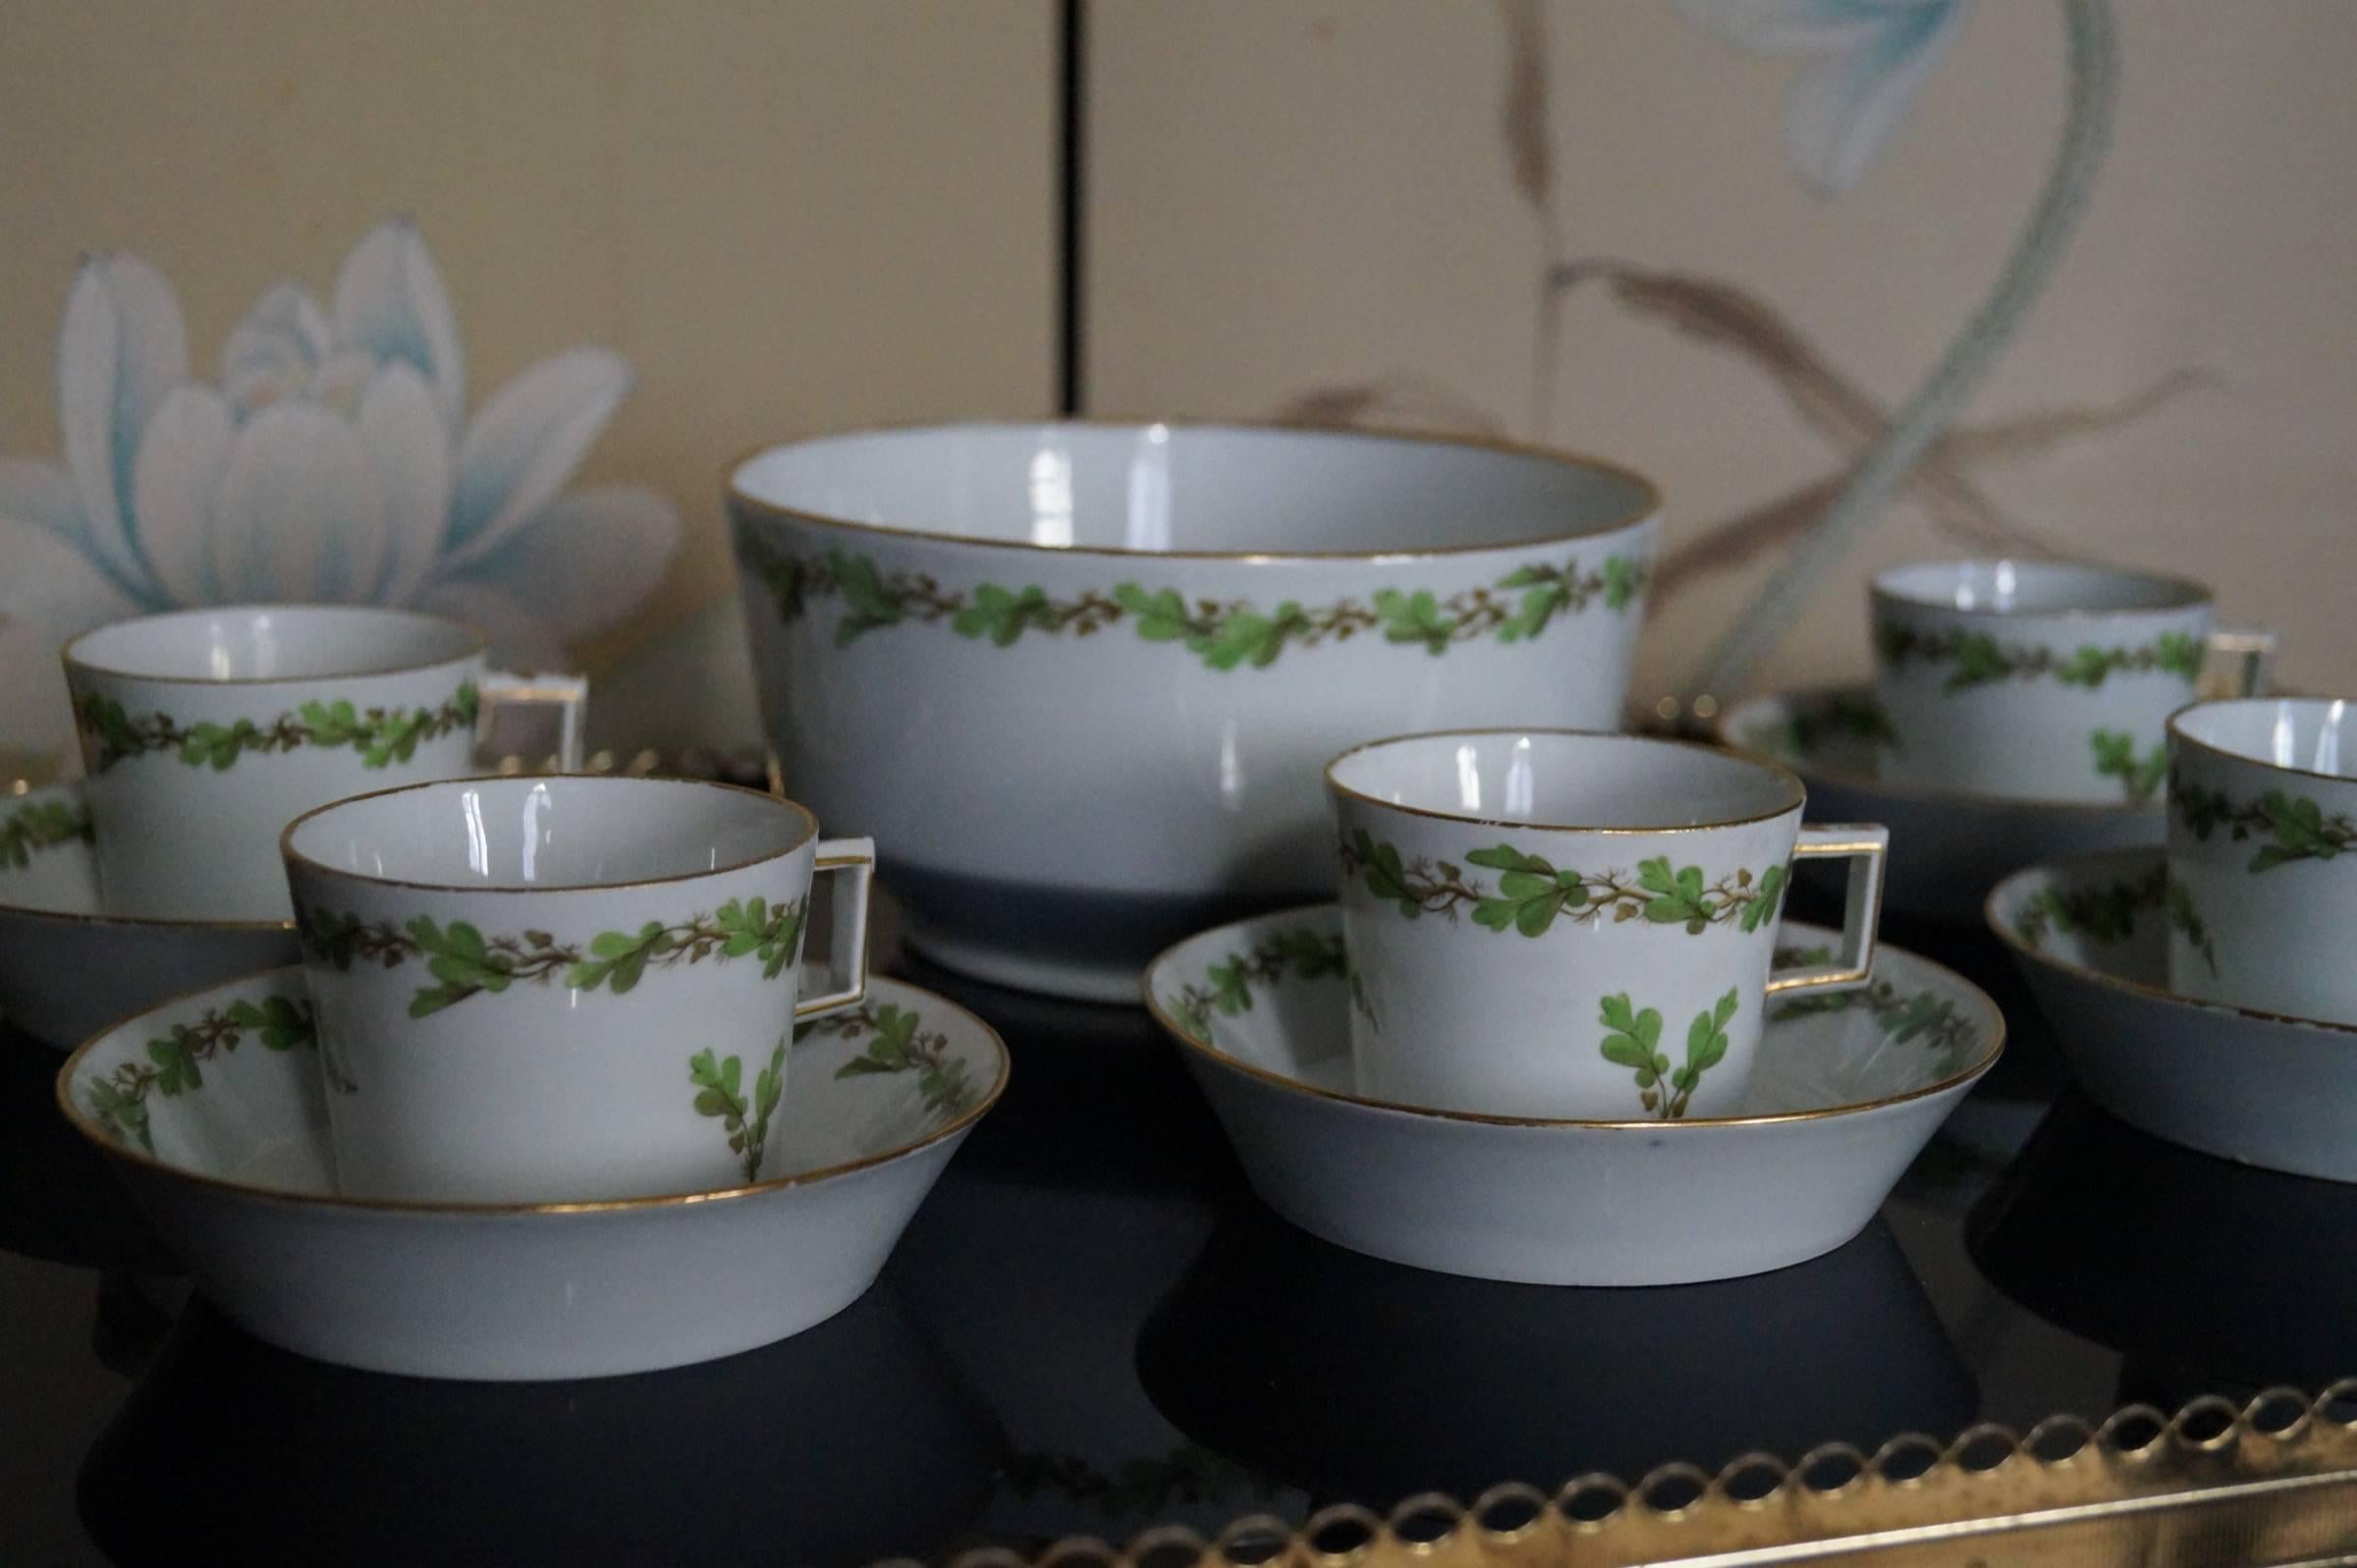 Antique Furstenberg porcelain demitasse cup and saucers and a bowl from the late 18th century.

All pieces are hand-painted in green with a Guirlande of oak leaves. All pieces have a nice gold rim. The square handles are typical for the classicism